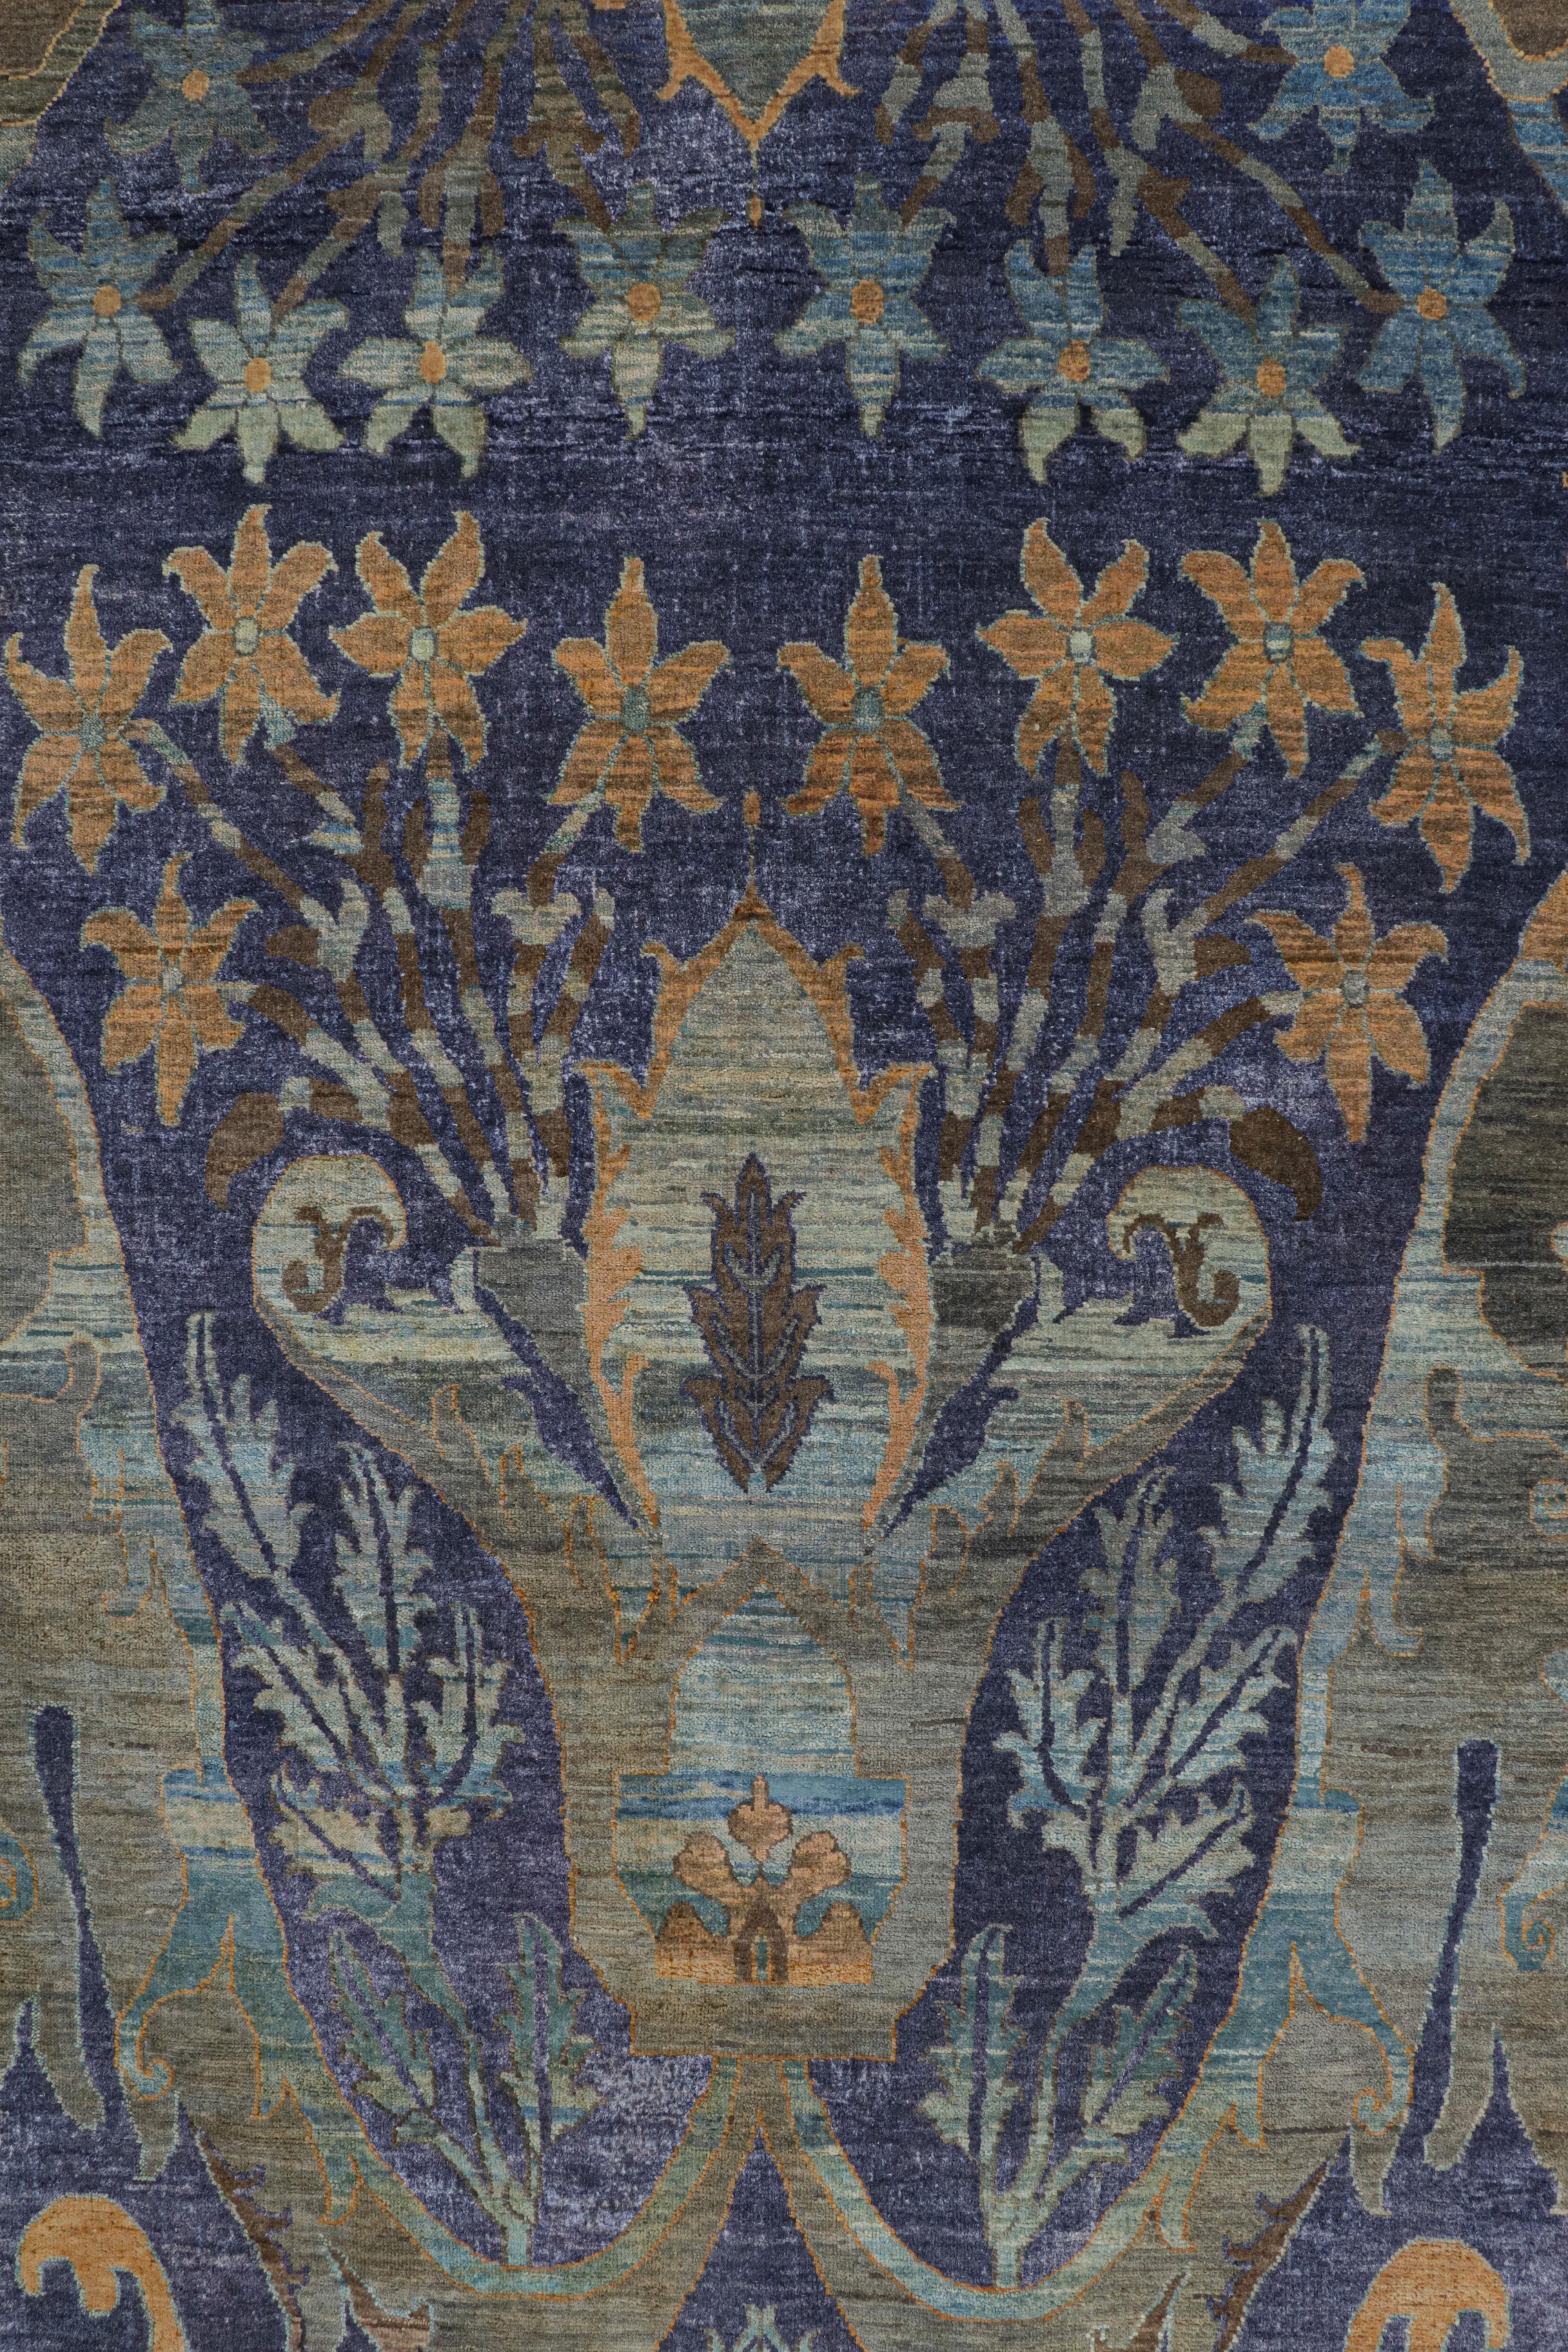 Modern Rug & Kilim’s Oushak-Style Rug in Indigo, Brown and Brown Floral Patterns For Sale